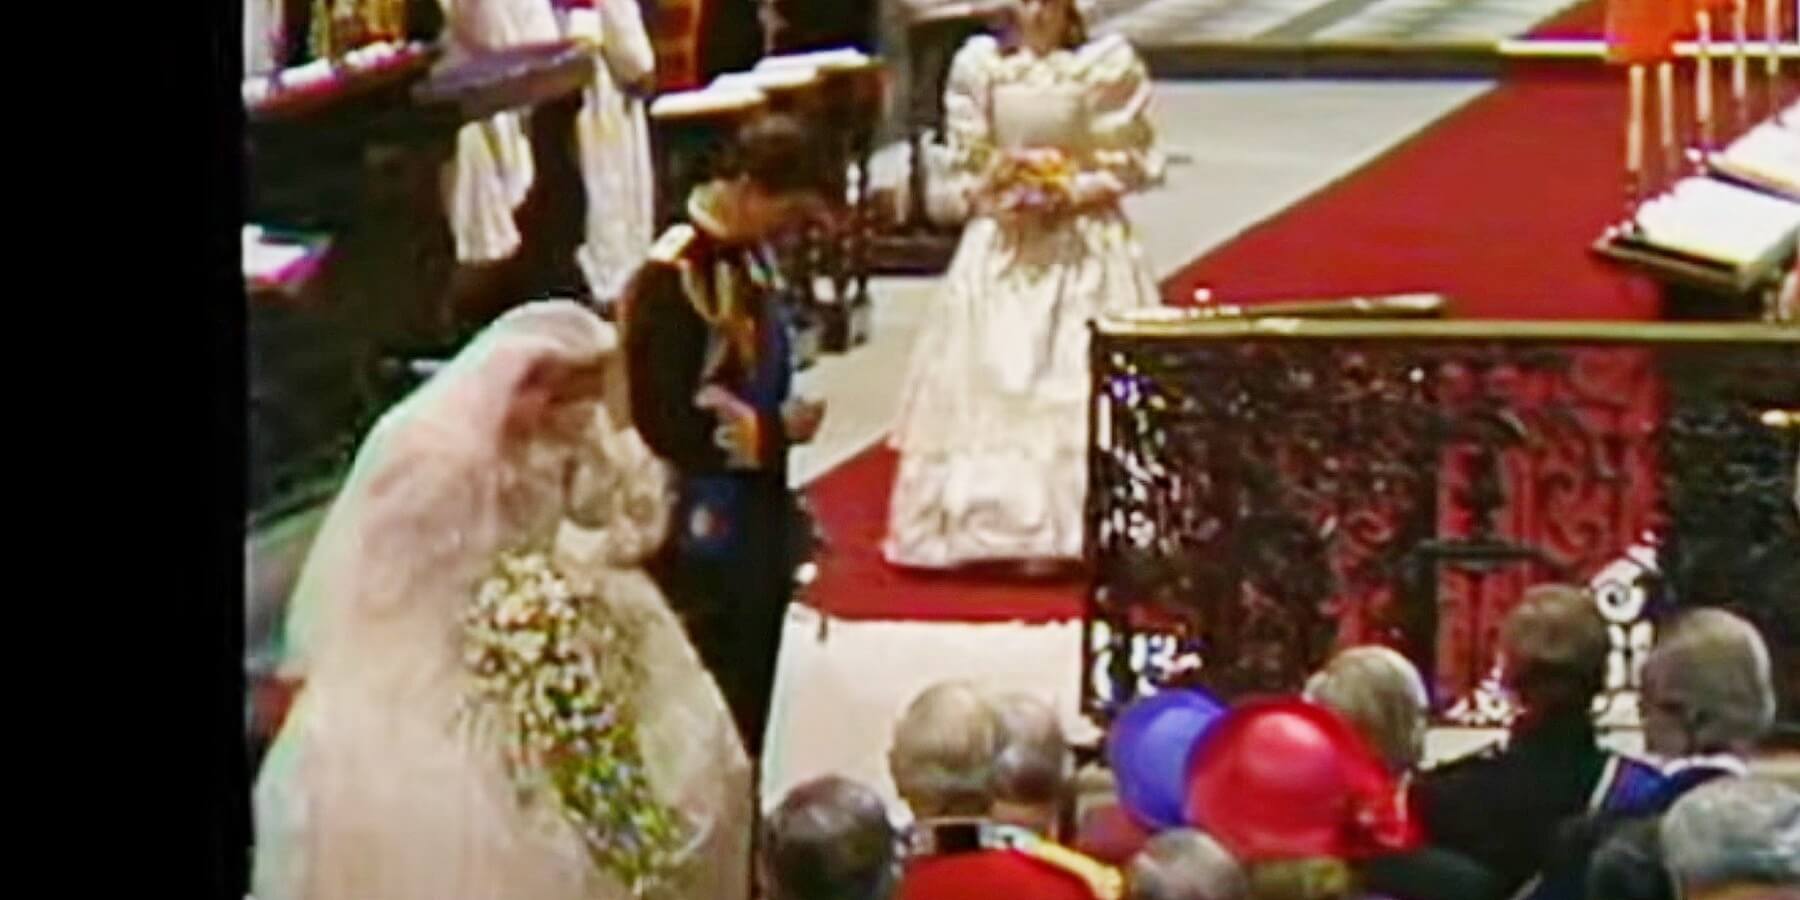 Princess Diana and Prince Charles bow and curtsy to Queen Elizabeth on their wedding day in 1981.